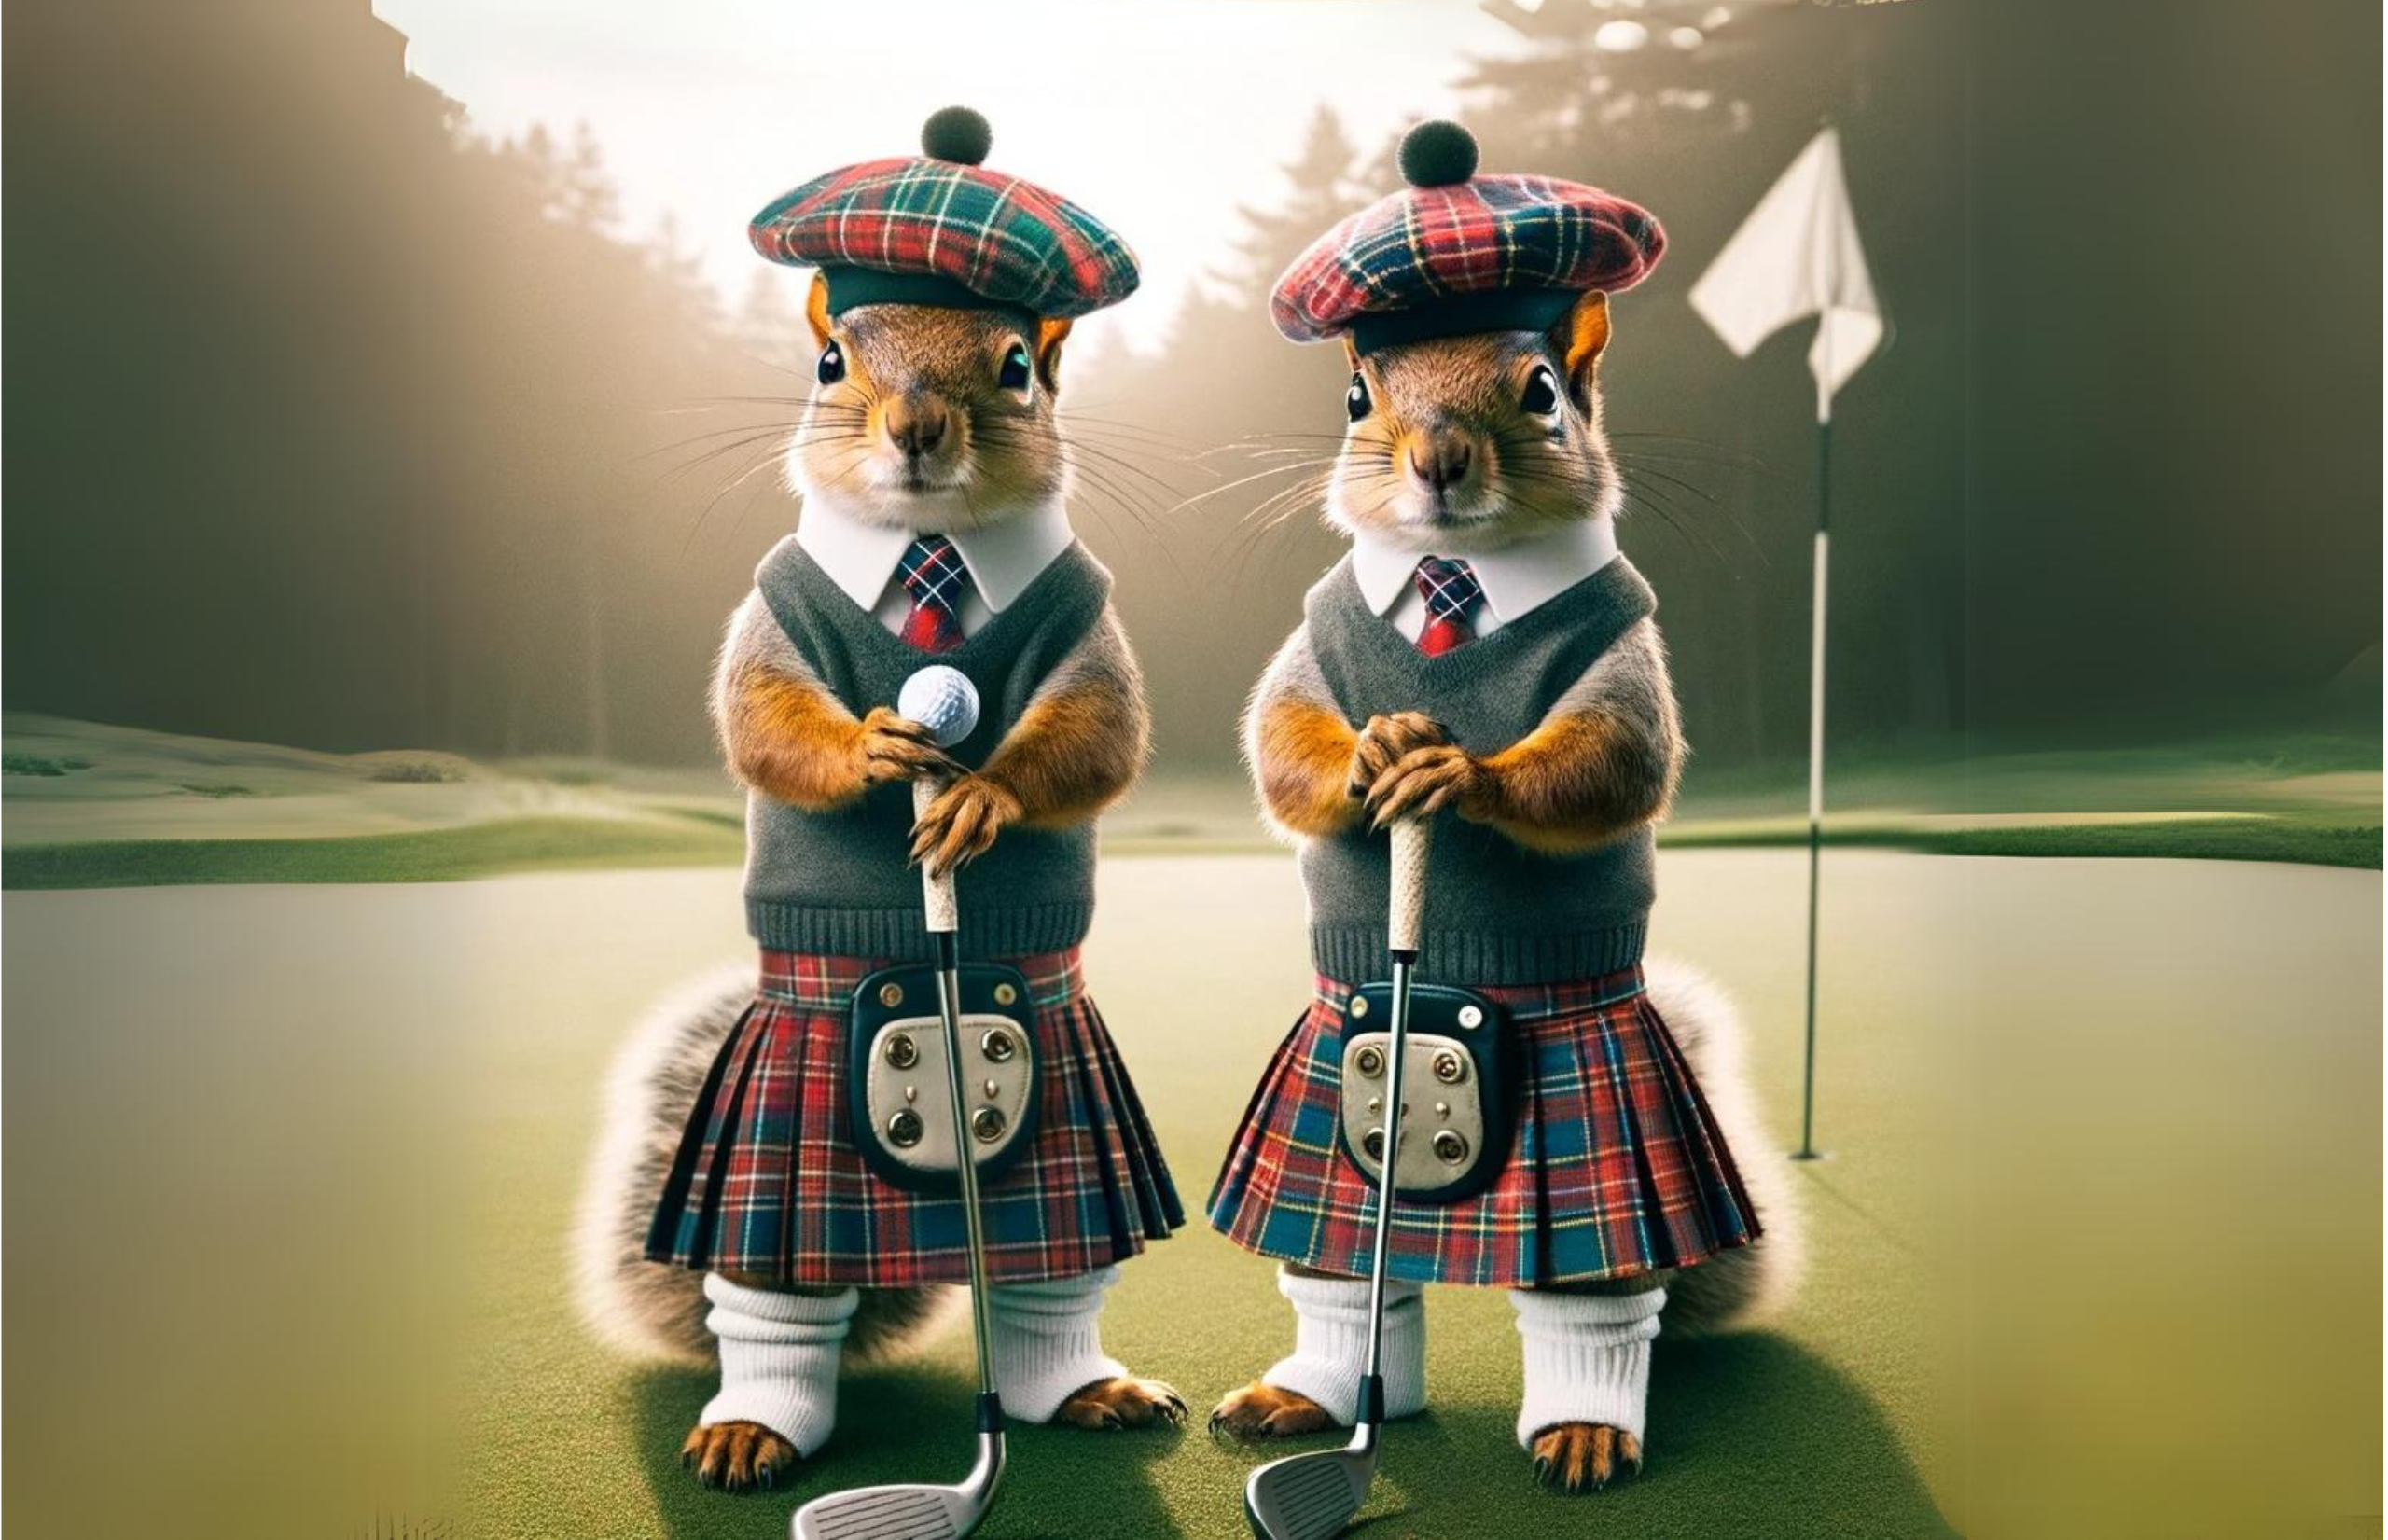 Squirrel Group wearing traditional golf attire